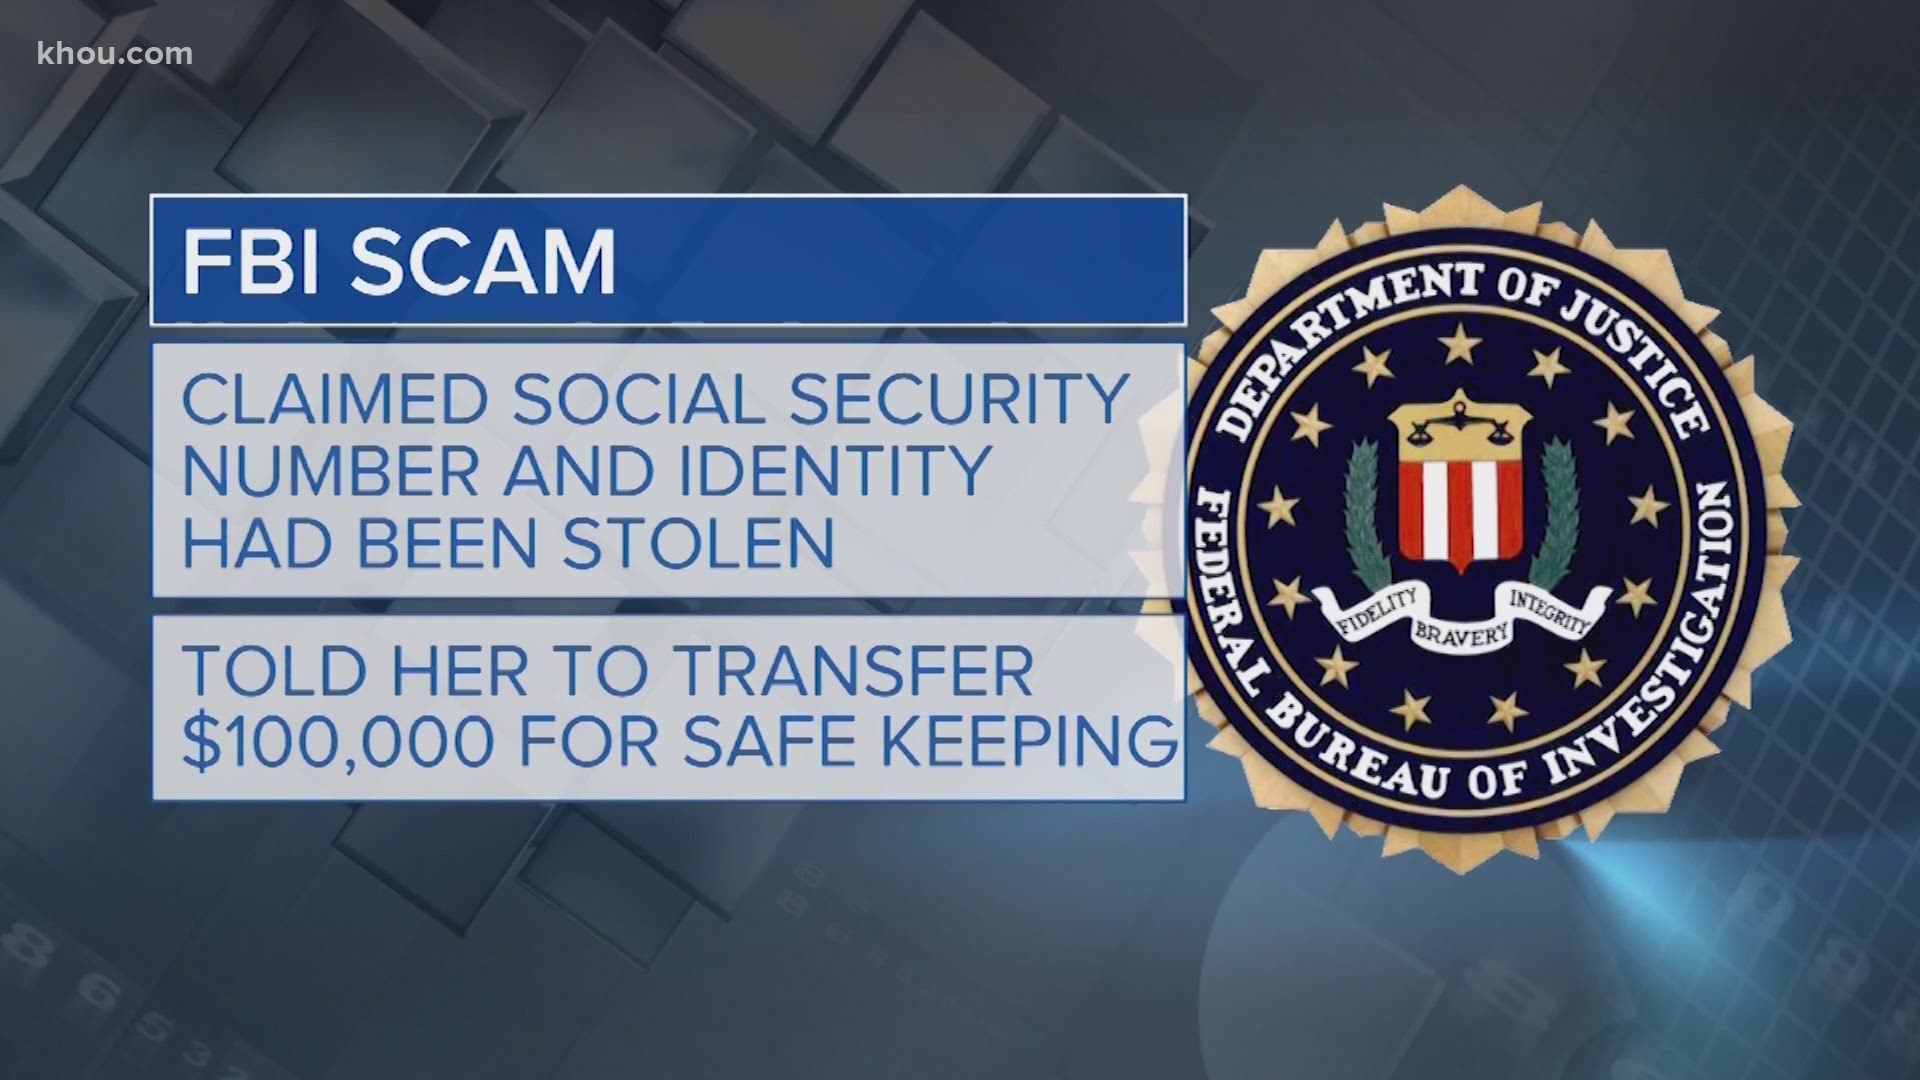 Con artists are now pretending to be with the FBI. One victim lost her life savings thinking she was talking to a federal agent, but it was just a scam.